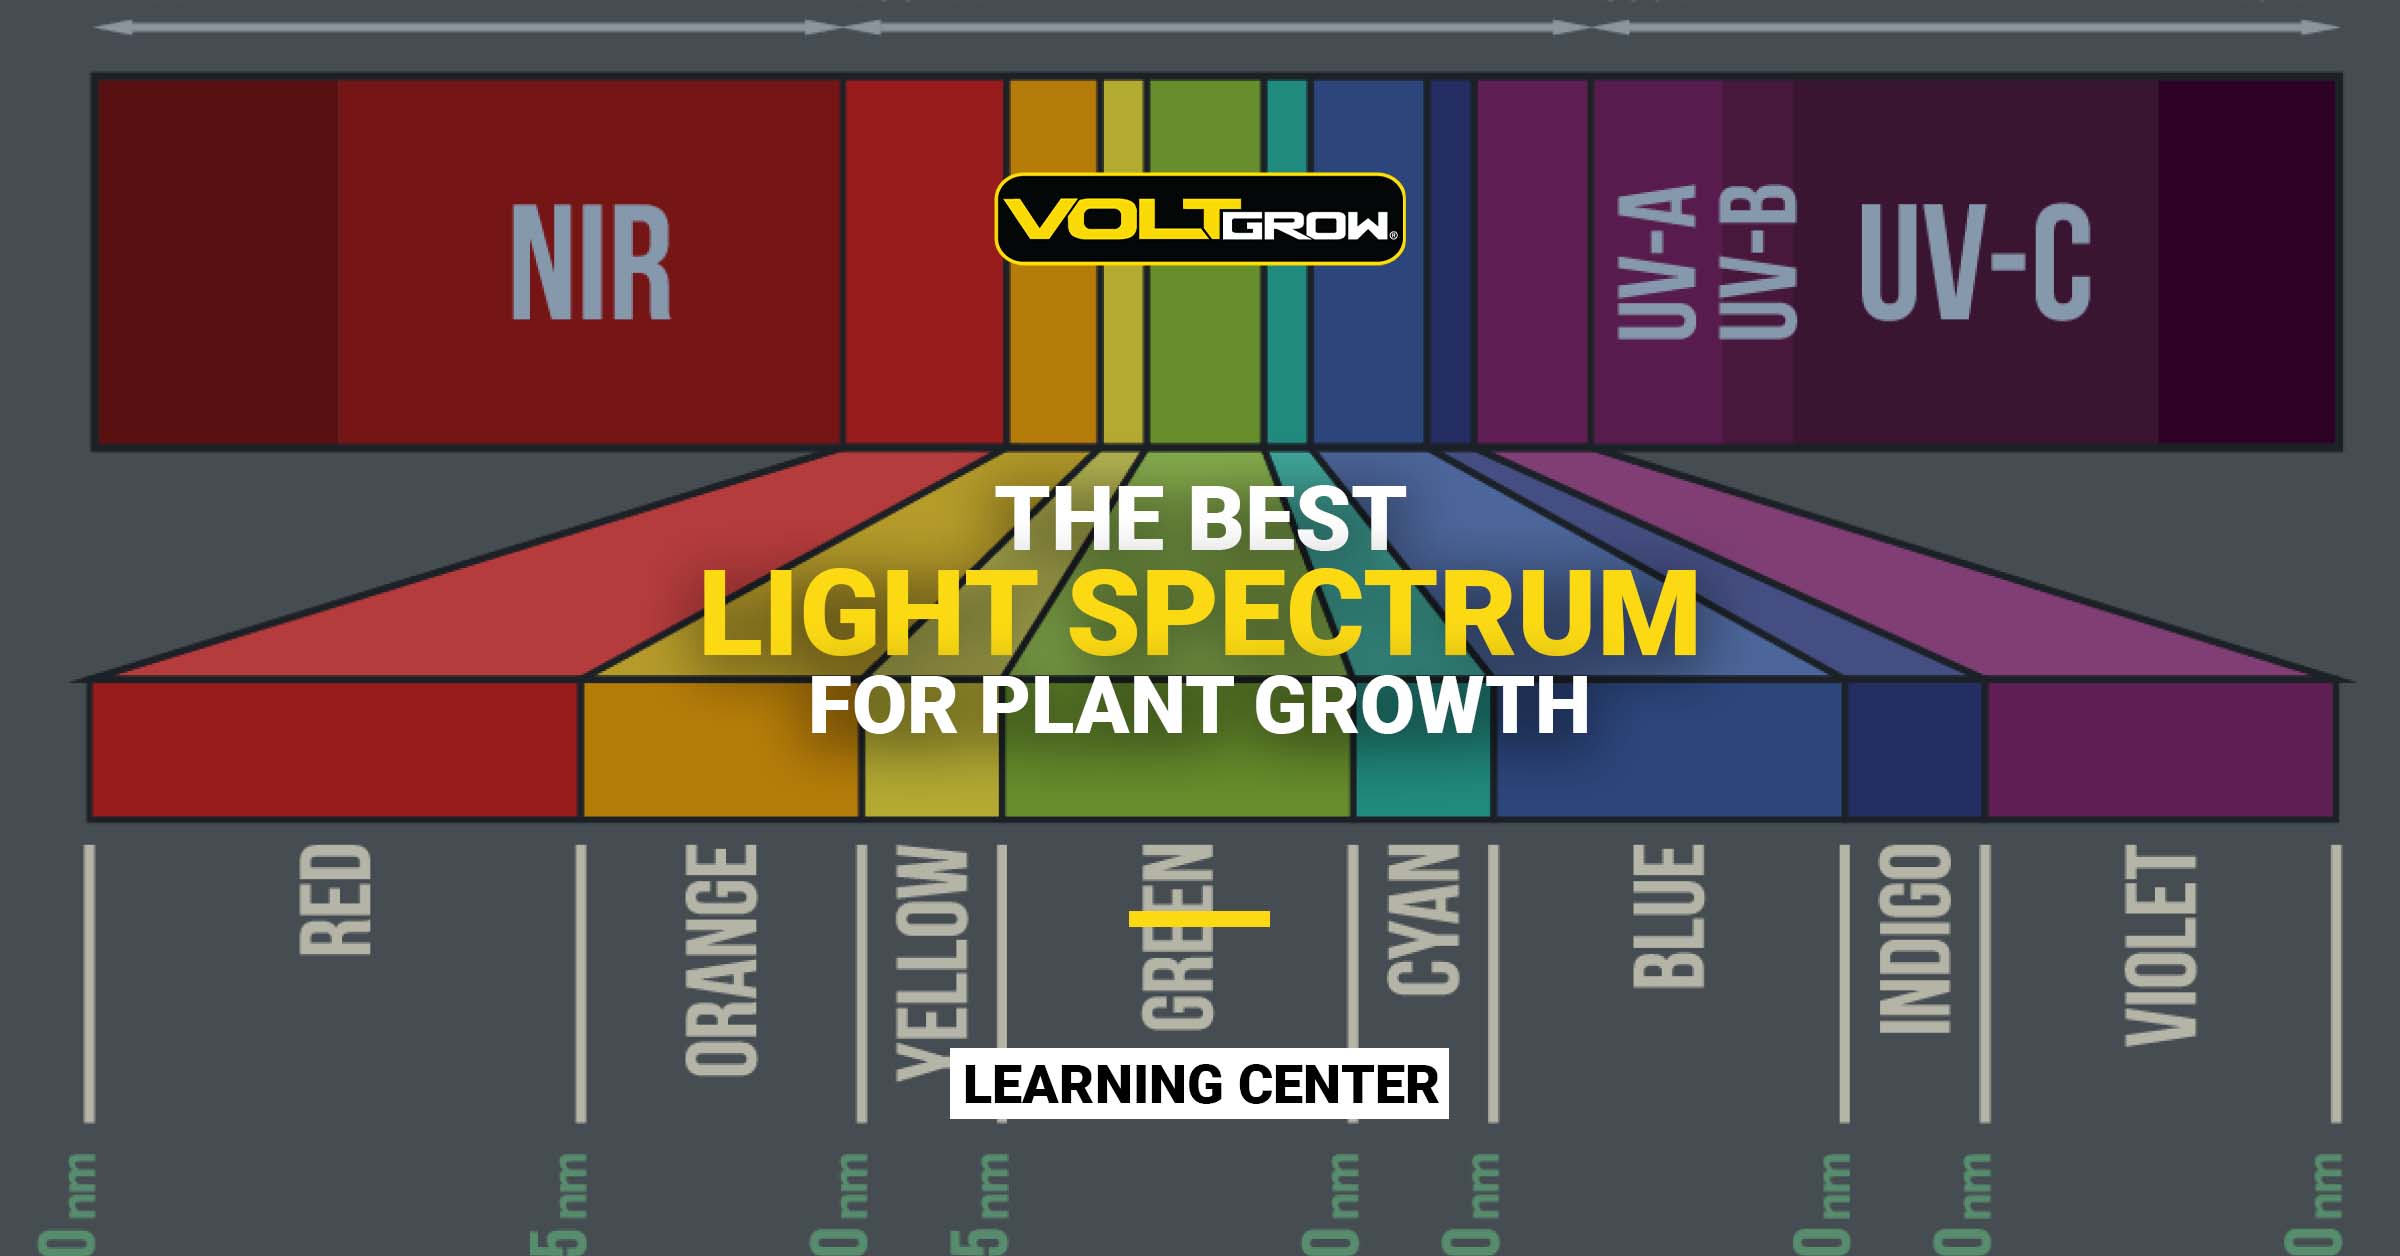 What Is the Best Light Spectrum for Plant Growth?